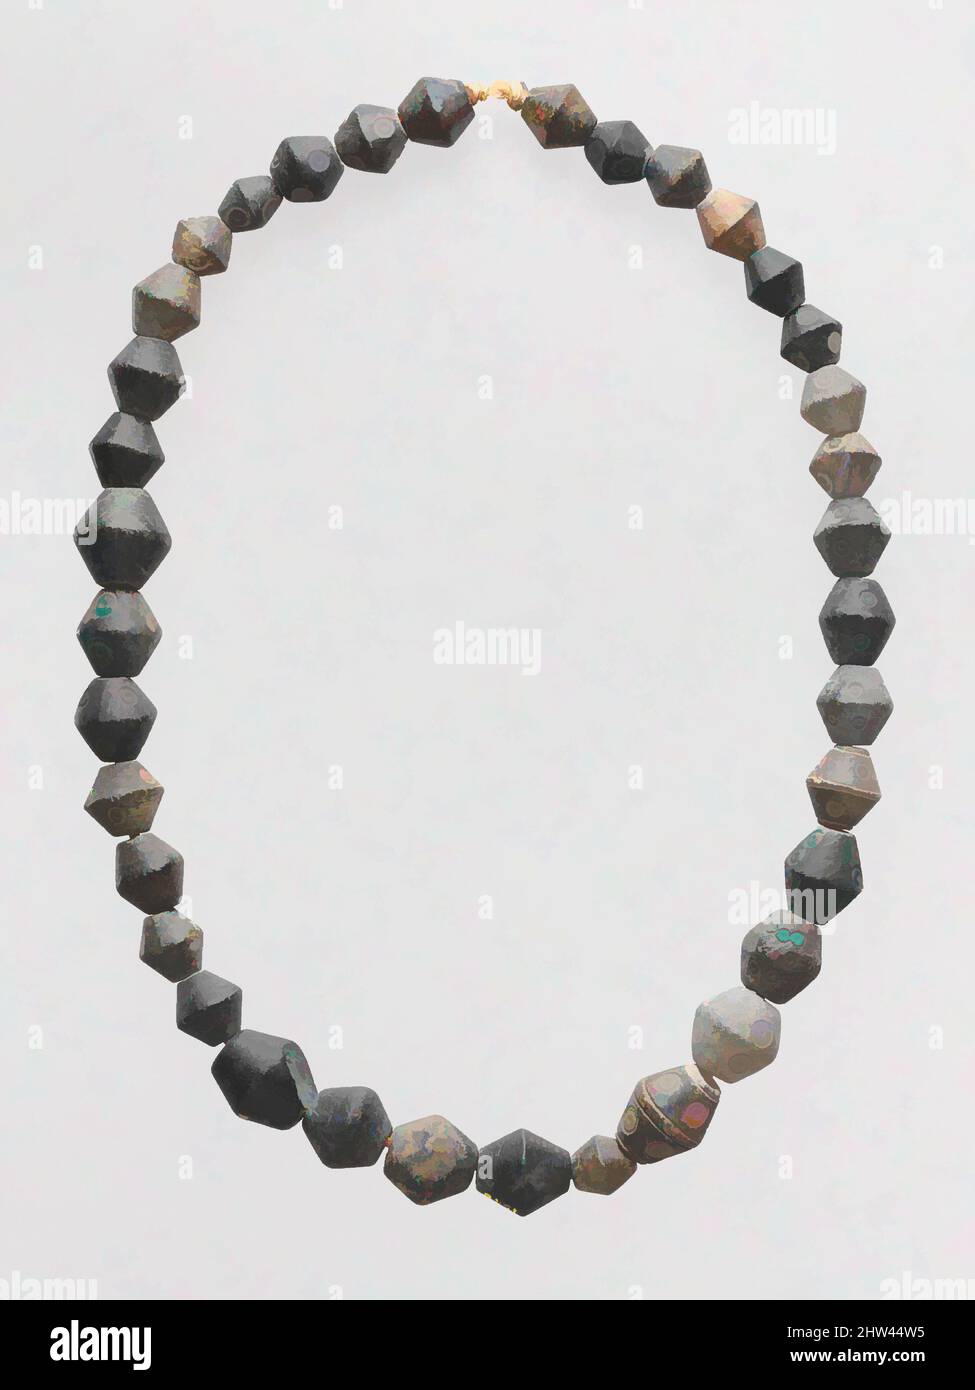 Art inspired by Chlorite necklace with 36 biconical beads, Late Bronze or Early Iron Age, ca. 1600–600 B.C., Cypriot, Chlorite, Approximate length of whole 26 1/2 in. (67.3 cm), Miscellaneous-Stone, Some beads have concentric circles, Classic works modernized by Artotop with a splash of modernity. Shapes, color and value, eye-catching visual impact on art. Emotions through freedom of artworks in a contemporary way. A timeless message pursuing a wildly creative new direction. Artists turning to the digital medium and creating the Artotop NFT Stock Photo